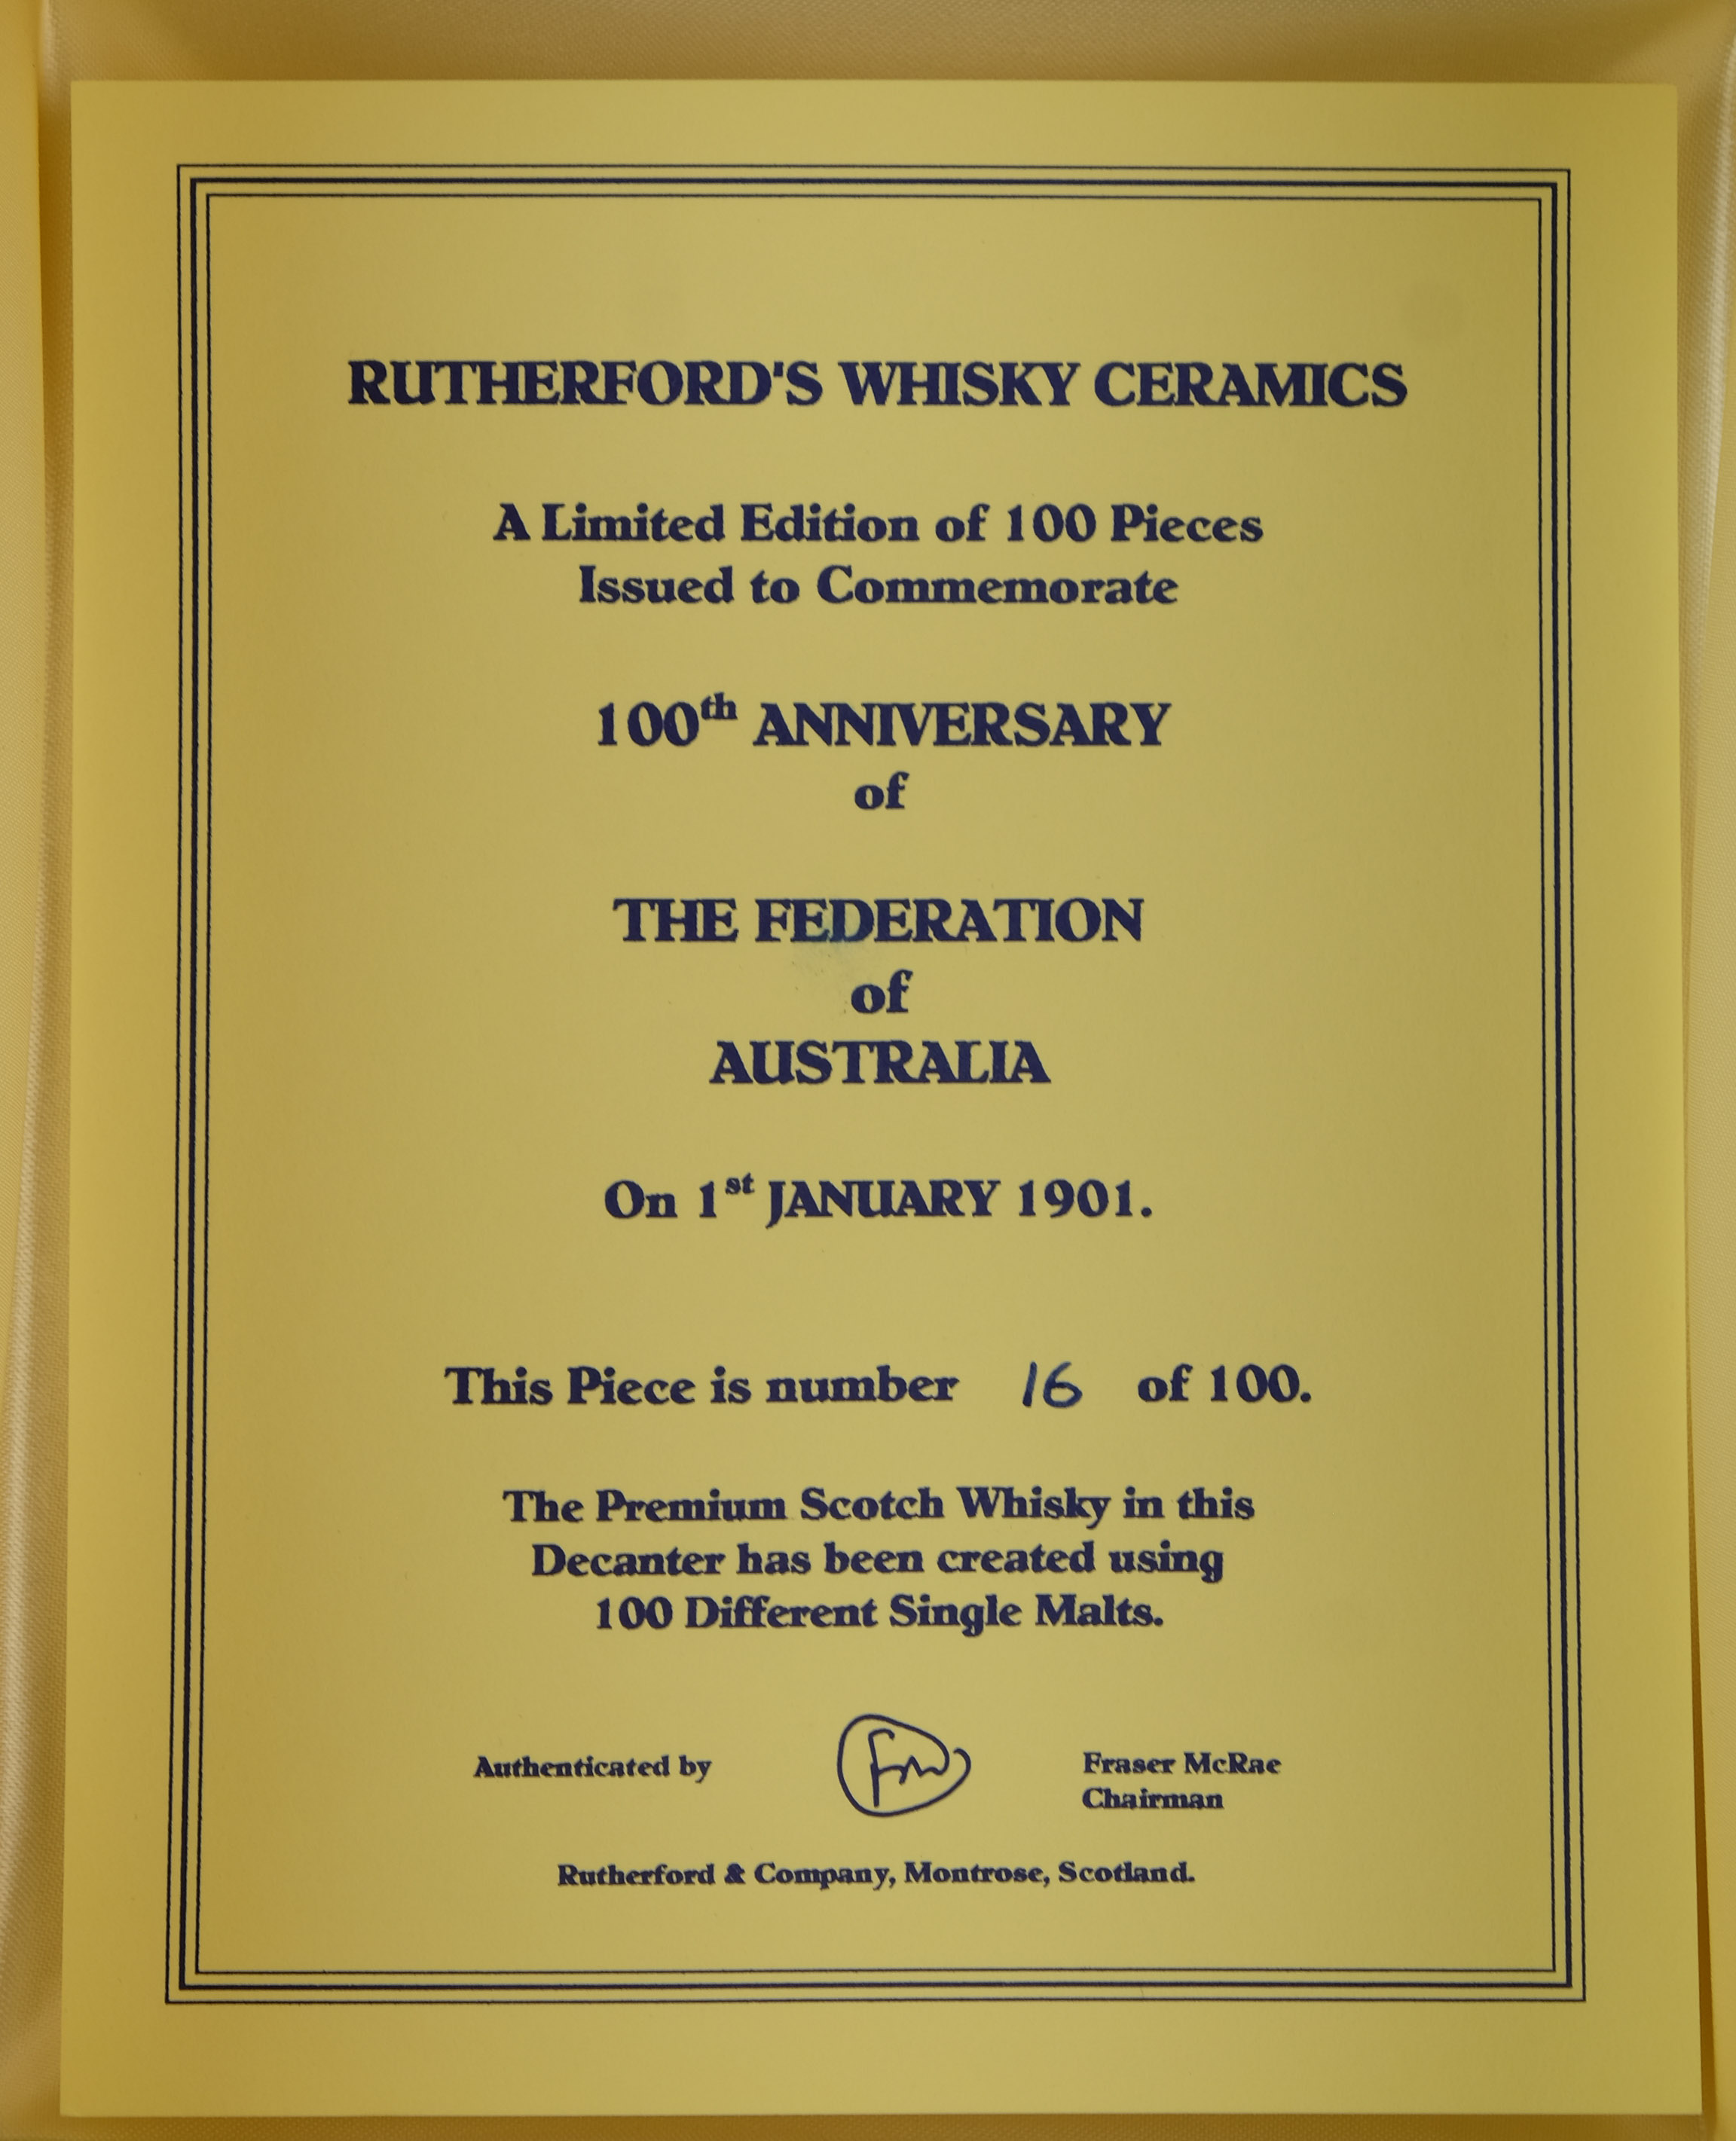 To Commemorate the 100th Anniversary of the Federation of Australia - Rutherfords Ceramics